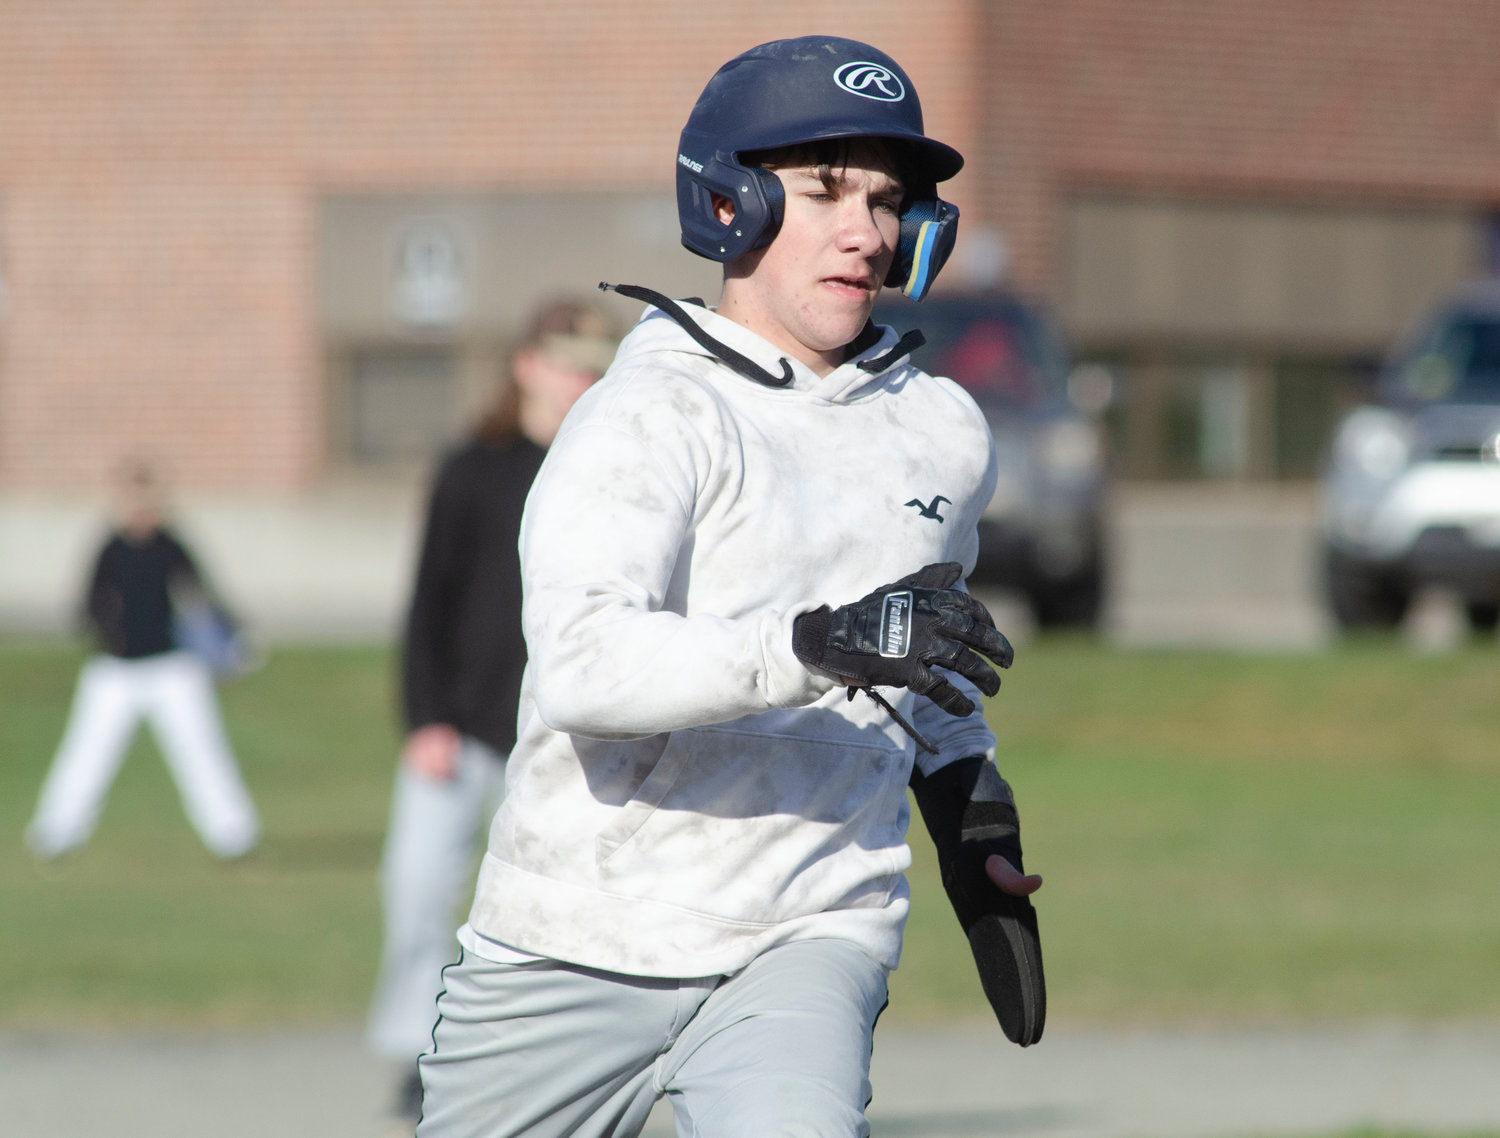 Sophomore shortstop Cam Rego heads for third base after smashing a ball over the center fielder’s head during the team’s scrimmage game against Westport on Wednesday.